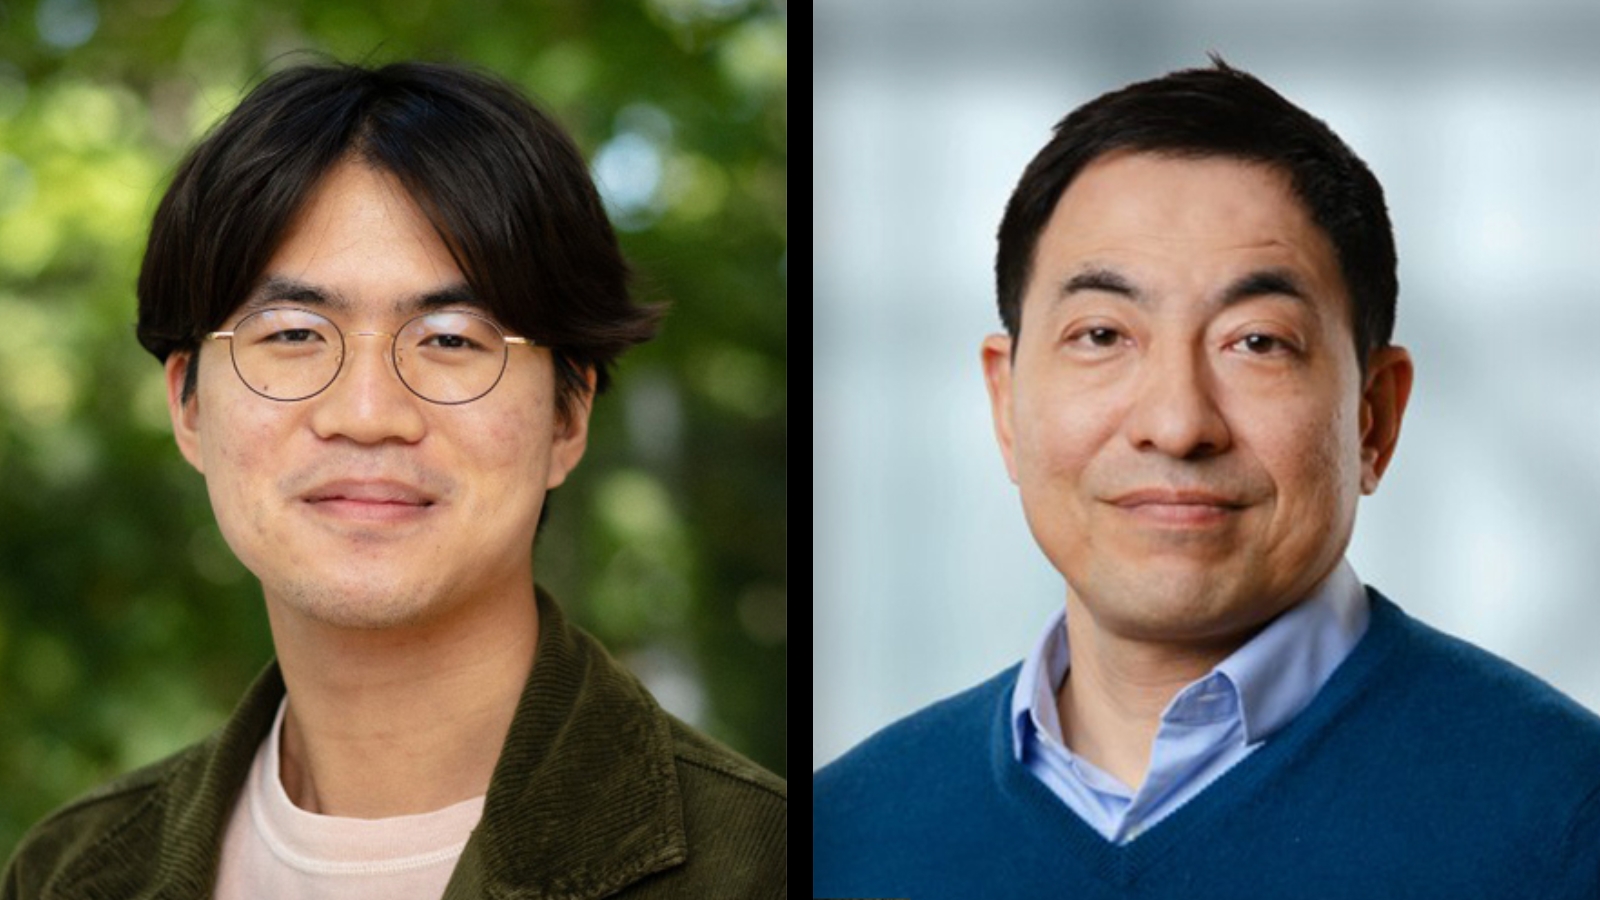 ​Study first author Derrick Lim, (L), is a PhD candidate in the lab of Dr. Kei Masani, a Senior Scientist at UHN's KITE Research Institute and senior author of the study.